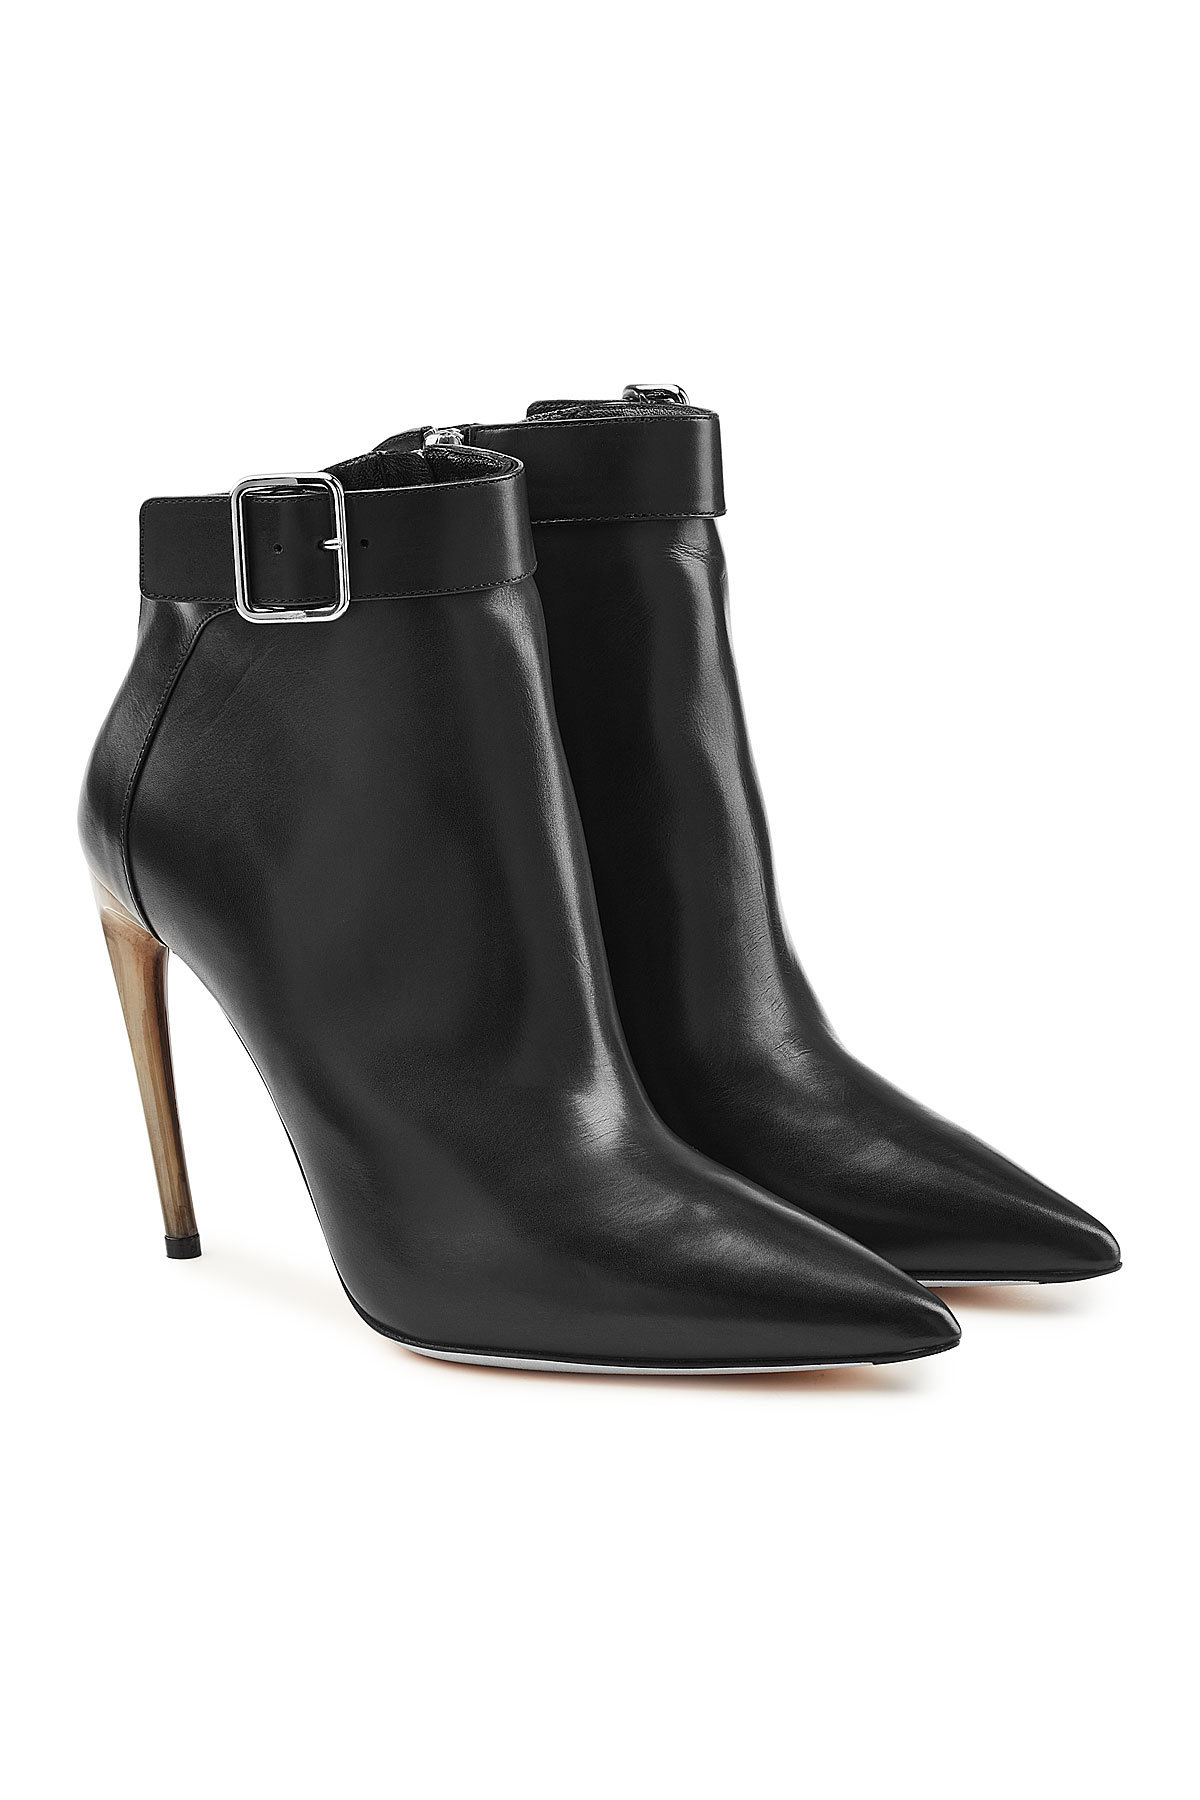 Leather Ankle Boots with Stiletto Heel by Alexander McQueen